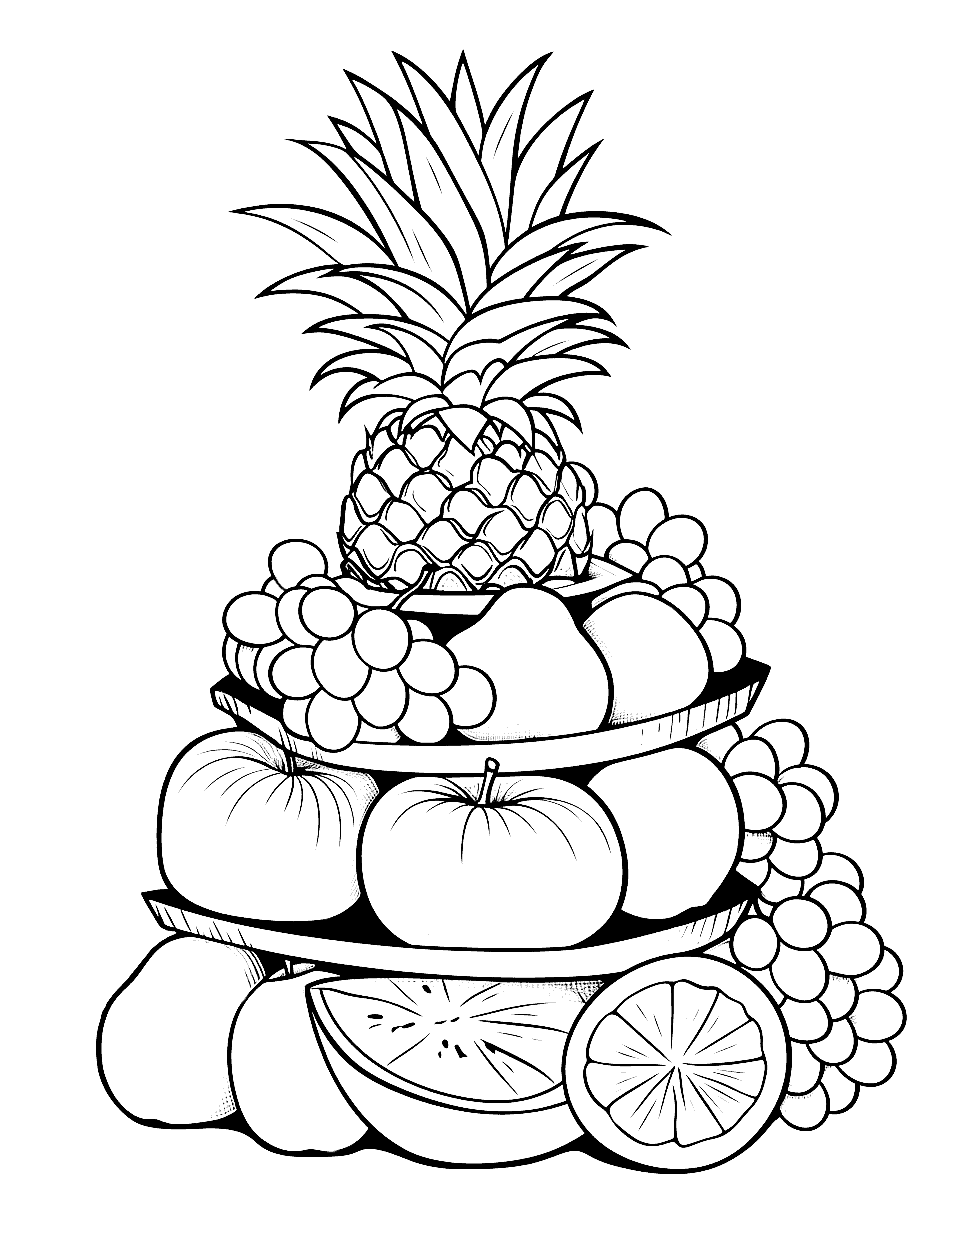 Fruit Tower Coloring Page - A tower of stacked fruits.